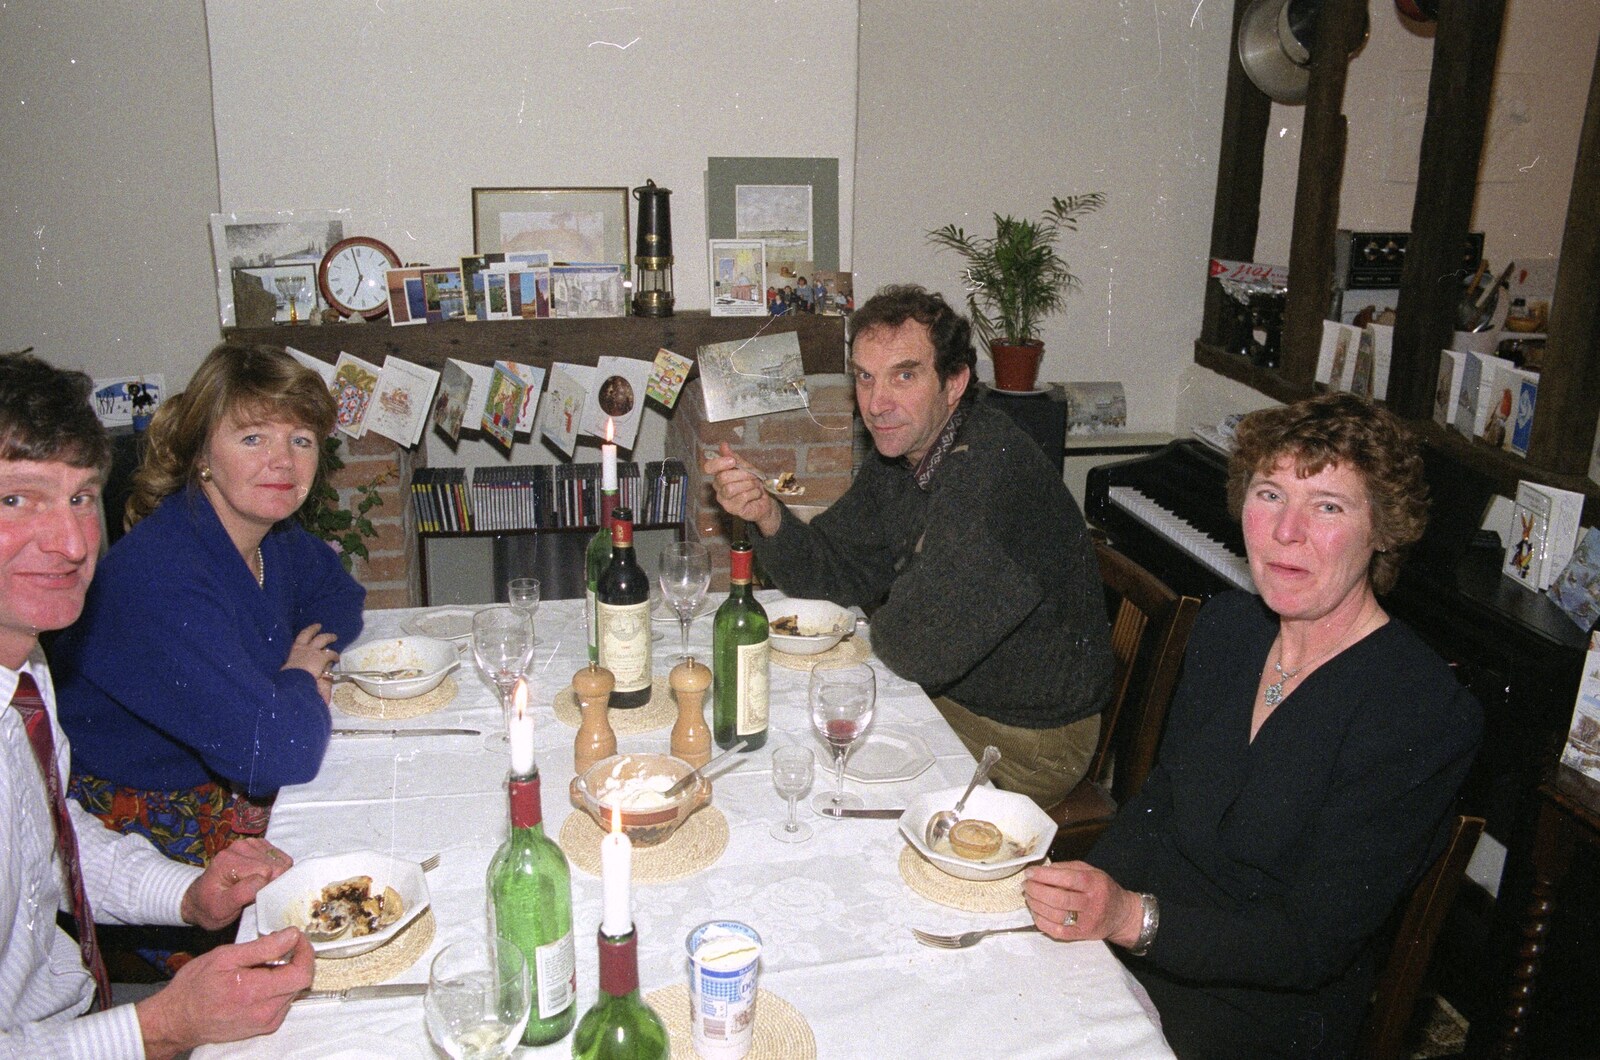 Geoff, Mother, Mike and Brenda from Pre-Christmas Dinner and a Next-Door Do, Stuston, Suffolk - 20th December 1990